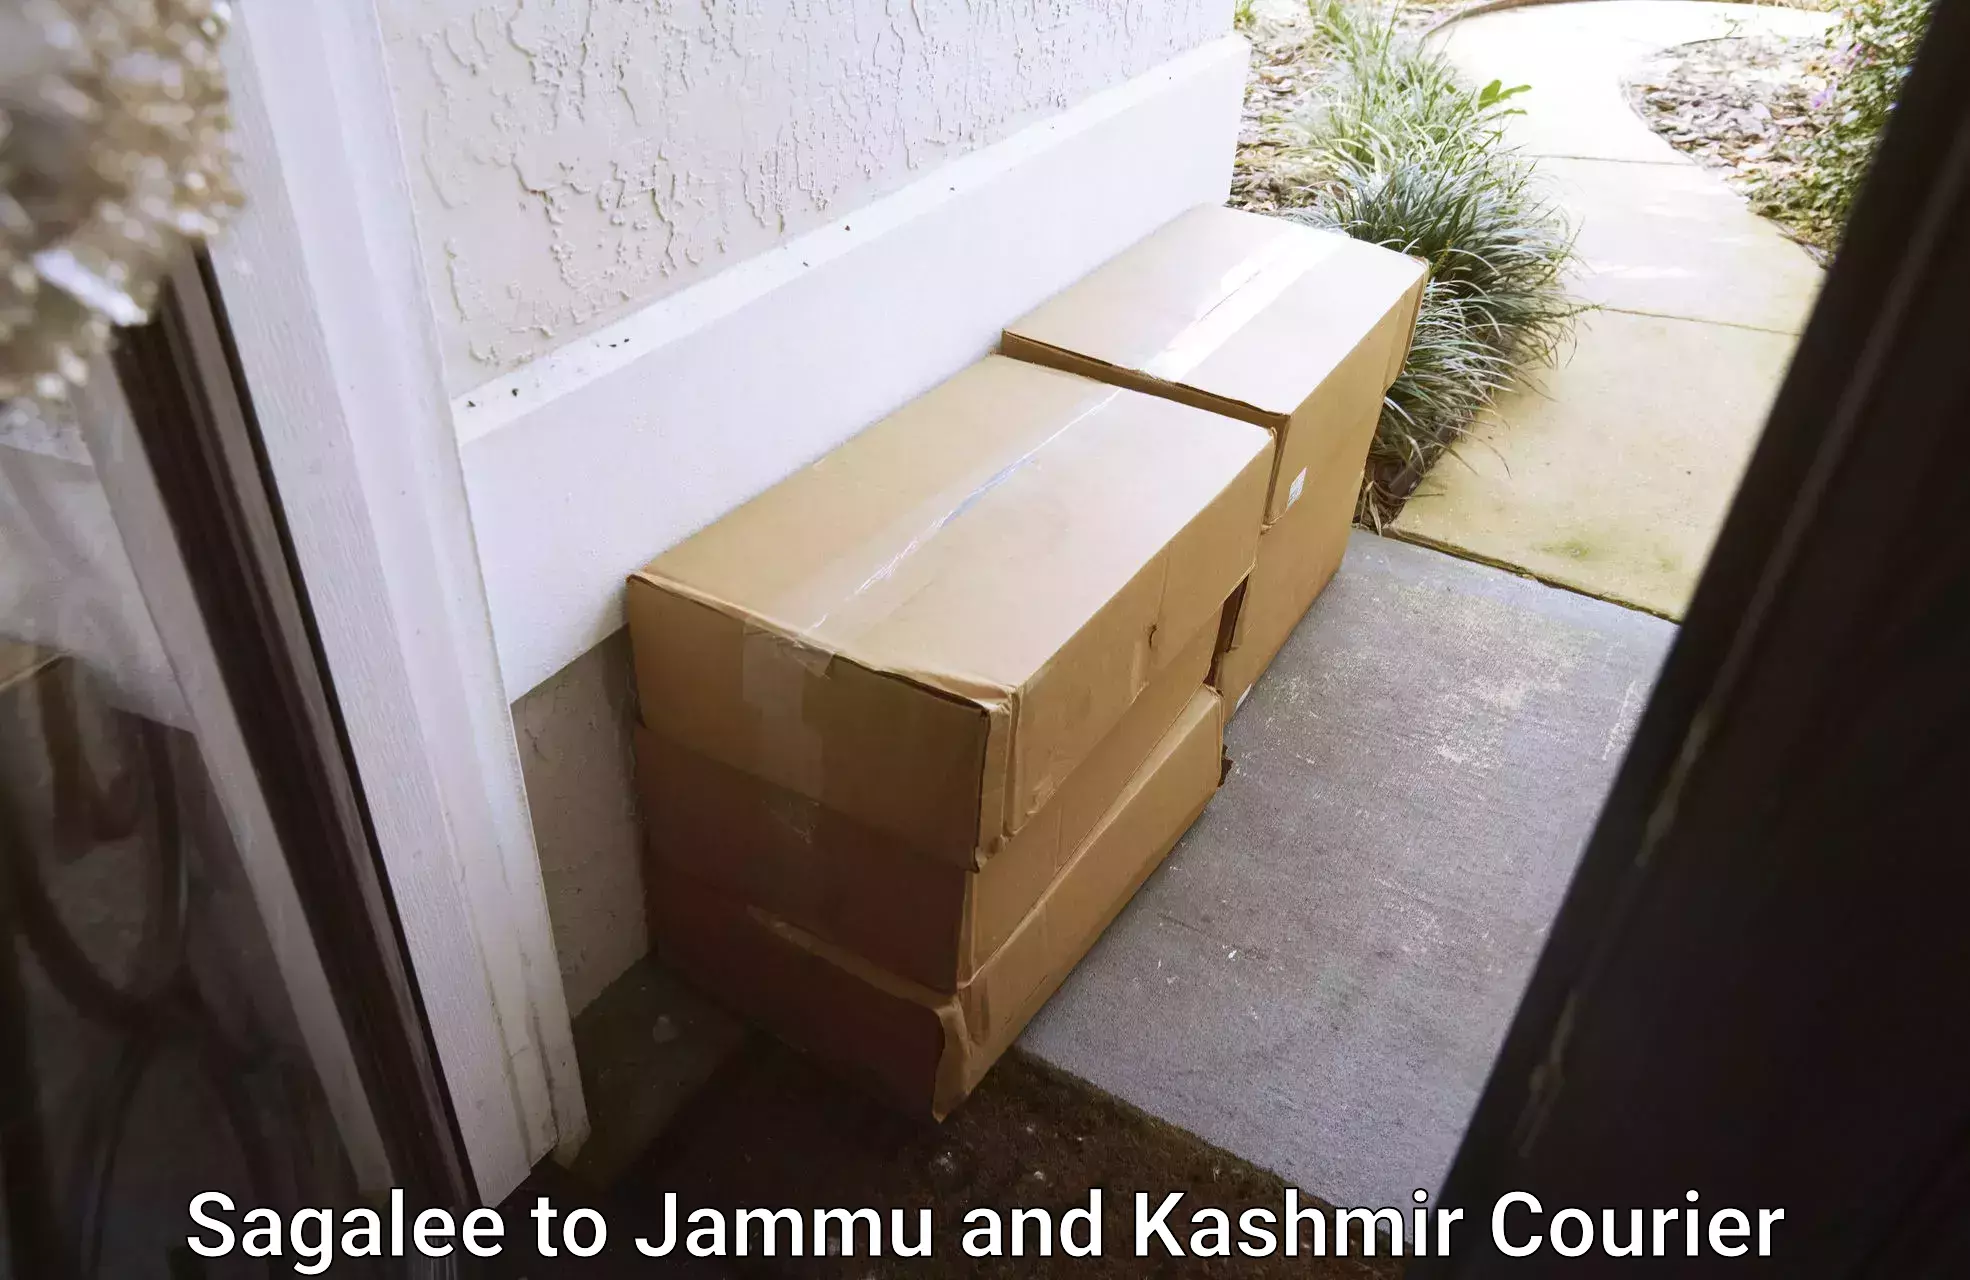 Courier service booking Sagalee to Jammu and Kashmir